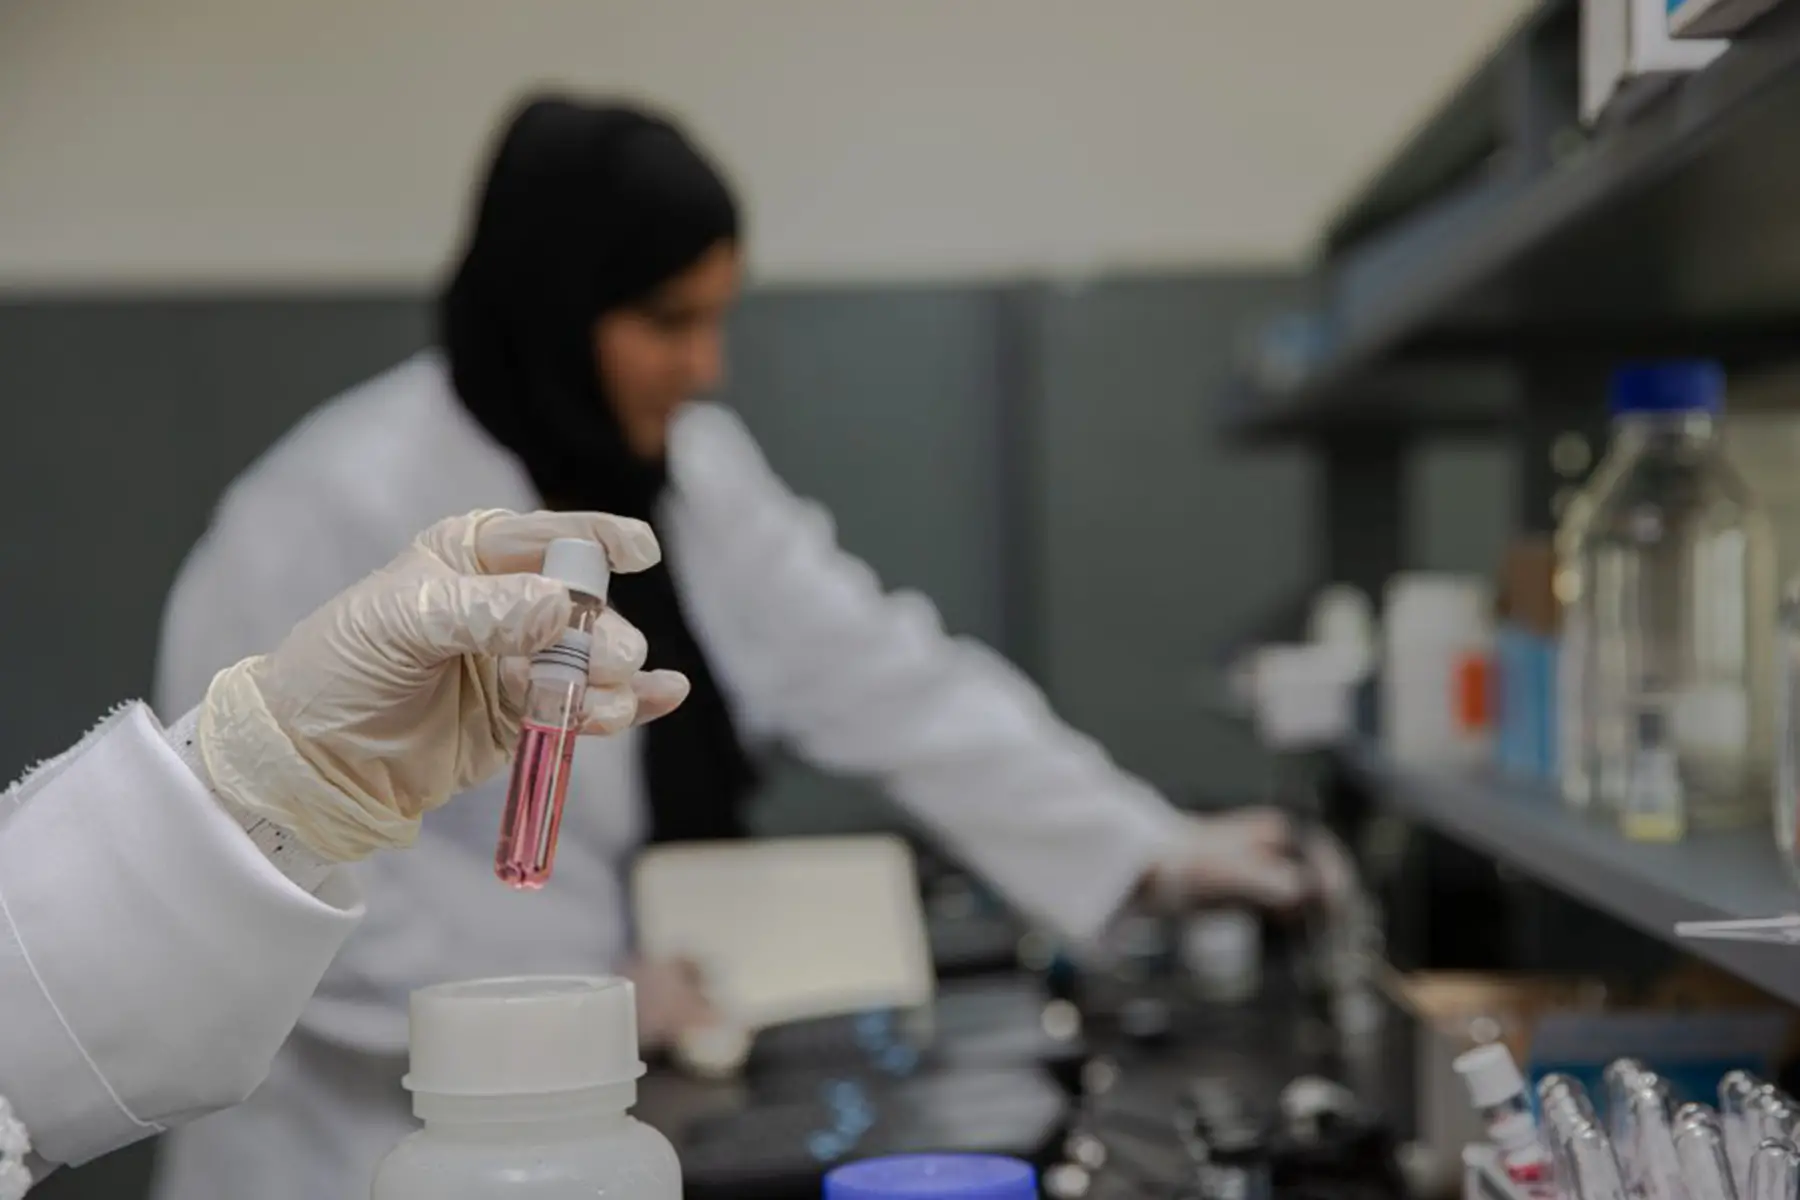 testing samples in lab - technician with hijab in background